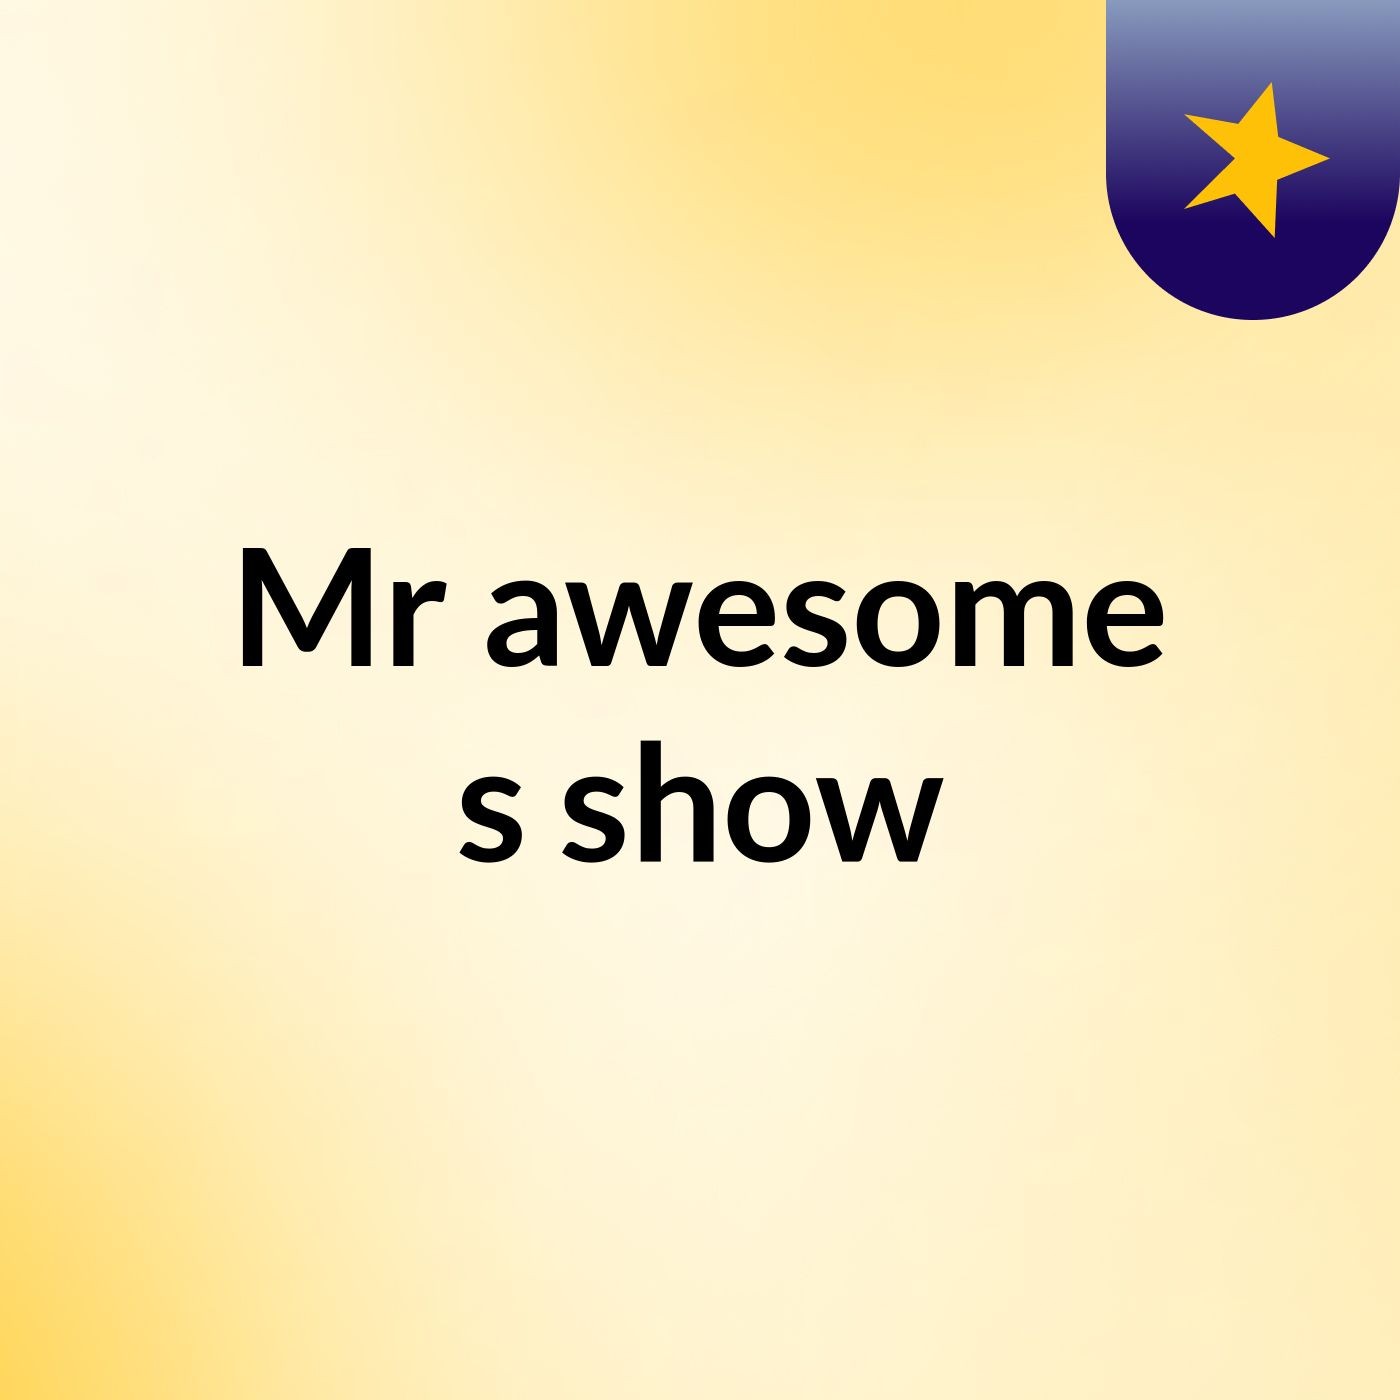 Mr awesome's show